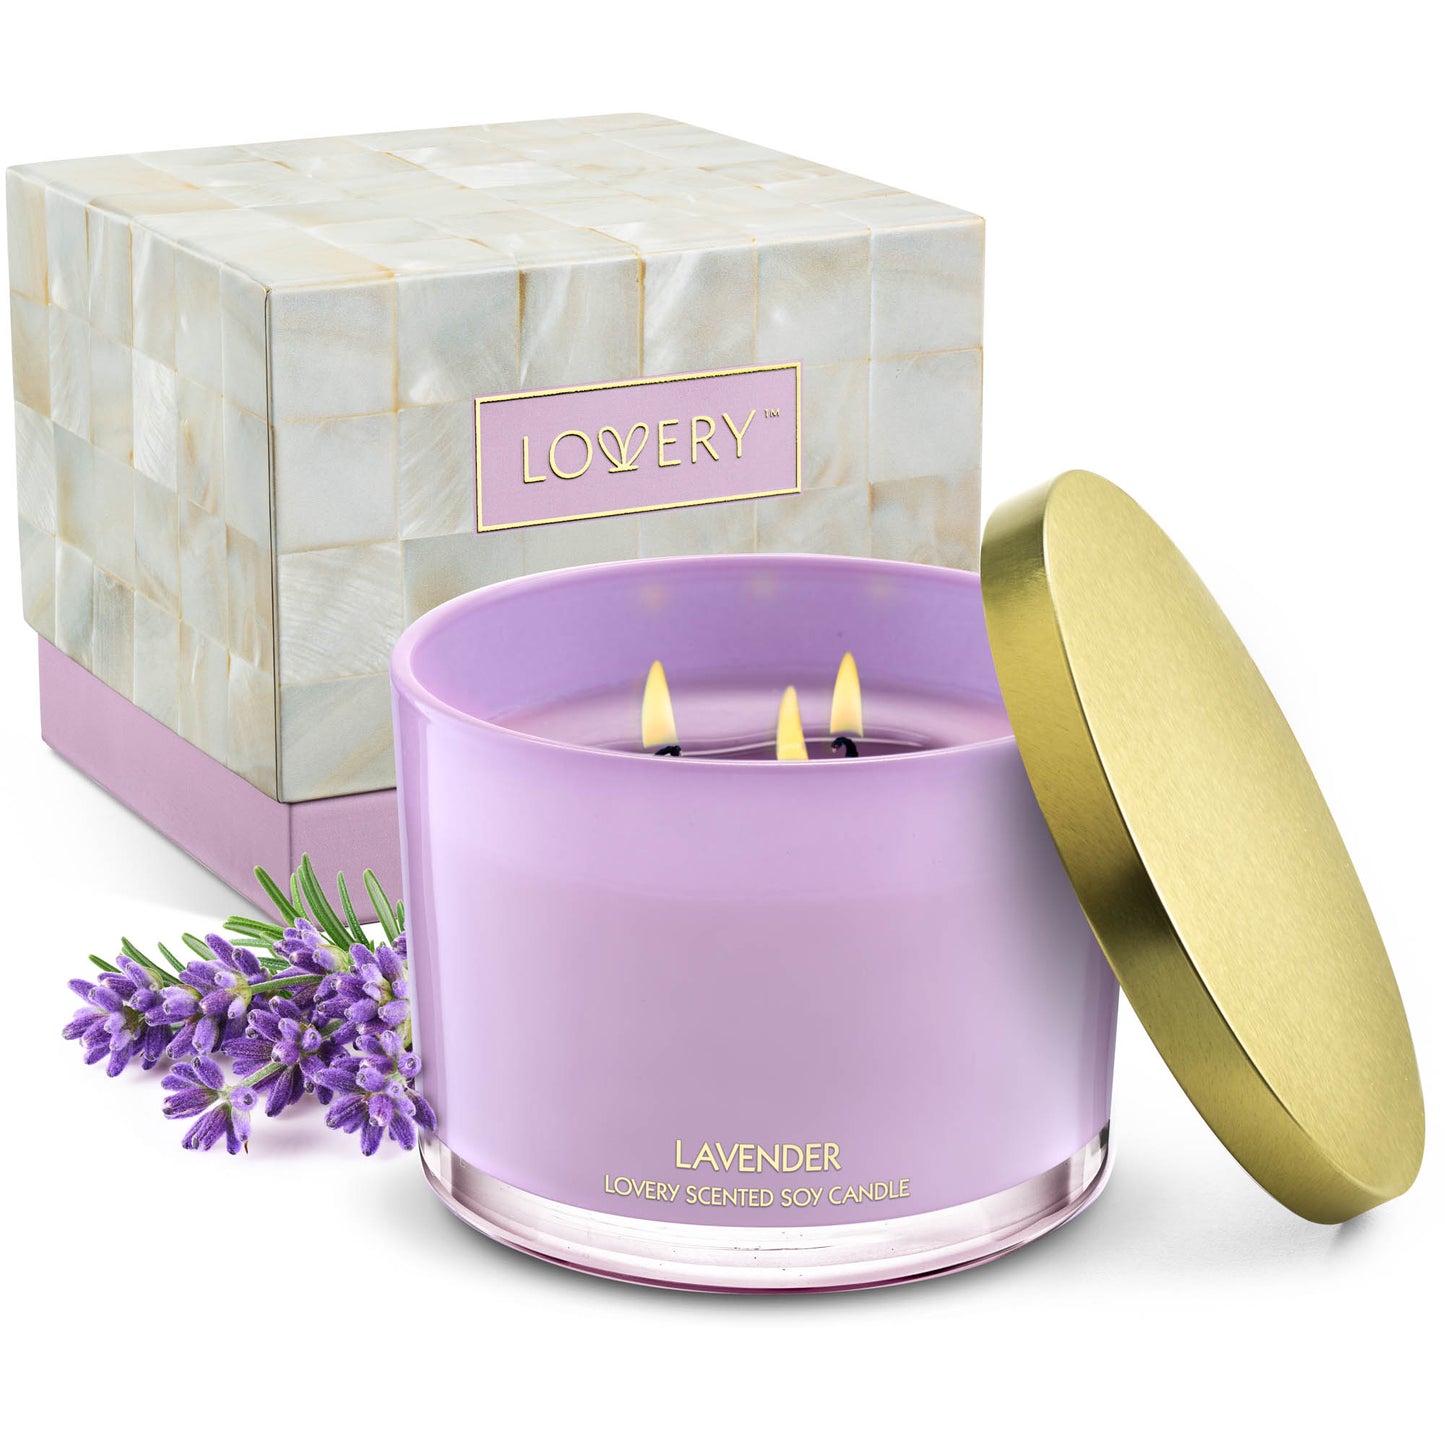 Lavender 3 Wick Candles - 13oz Soy Wax Home Candle